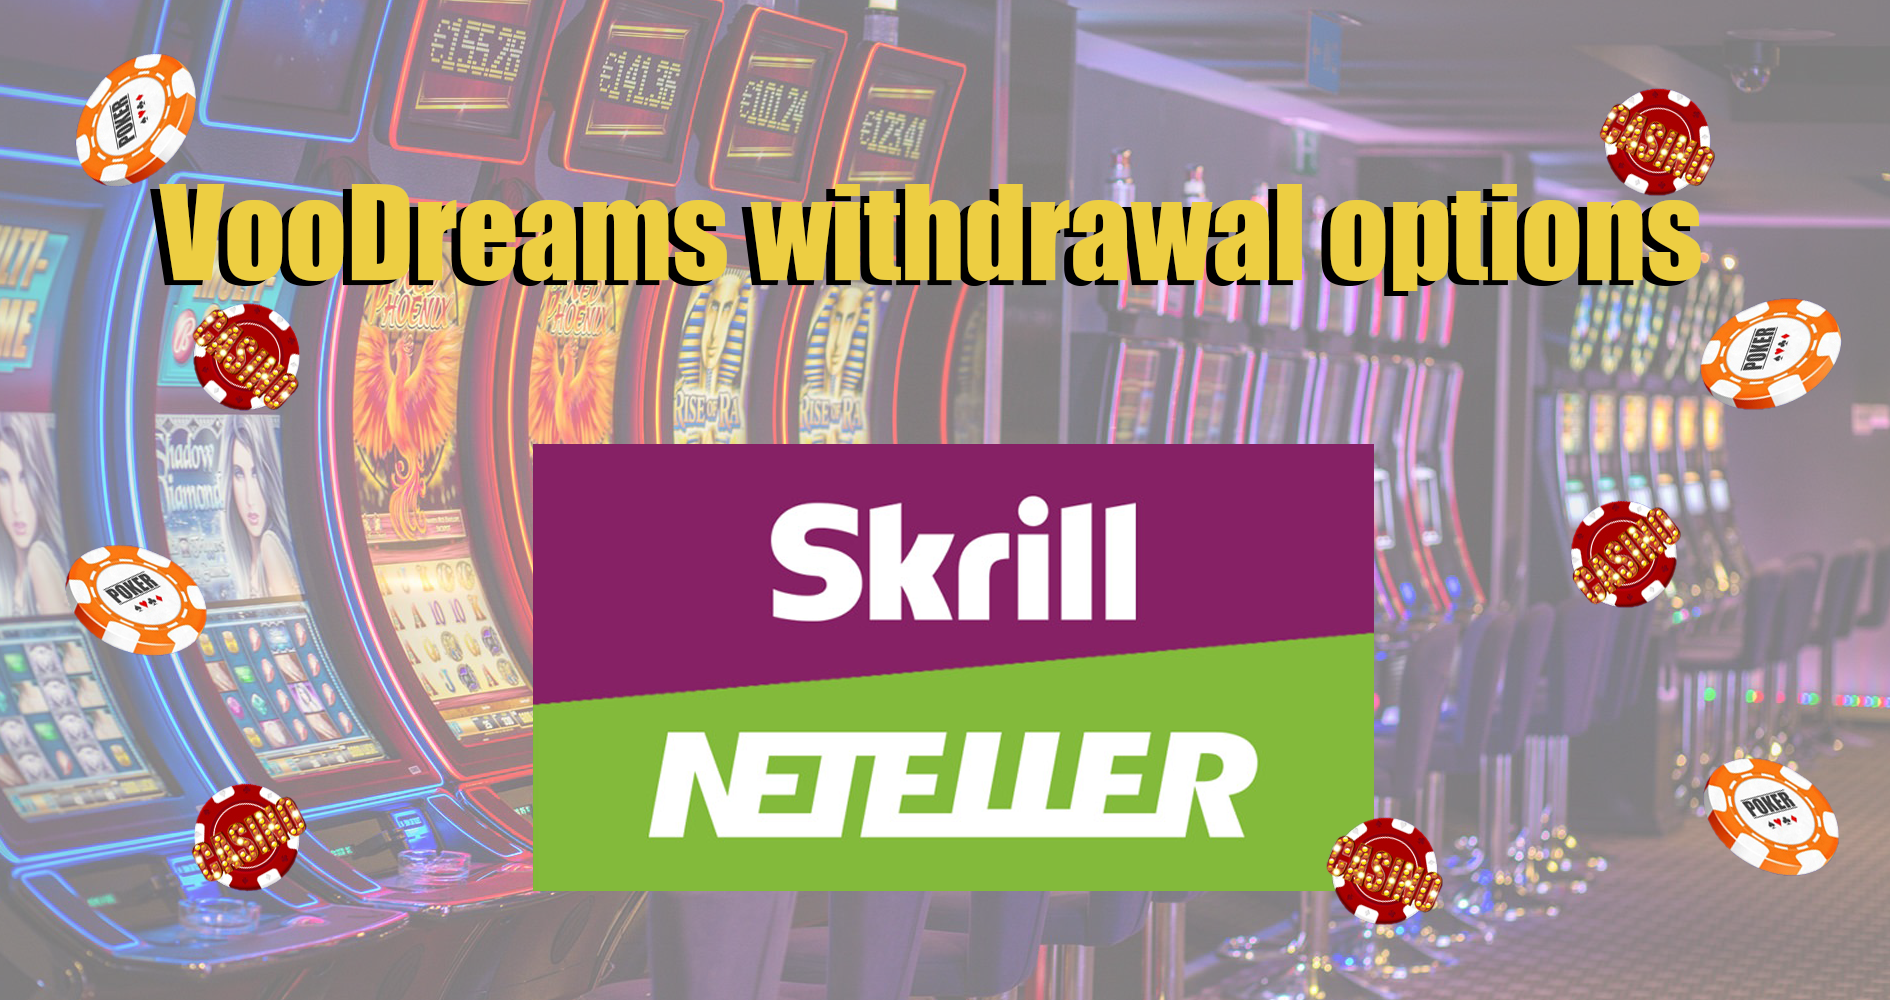 All withdrawal options on the Voodoo Dreams.